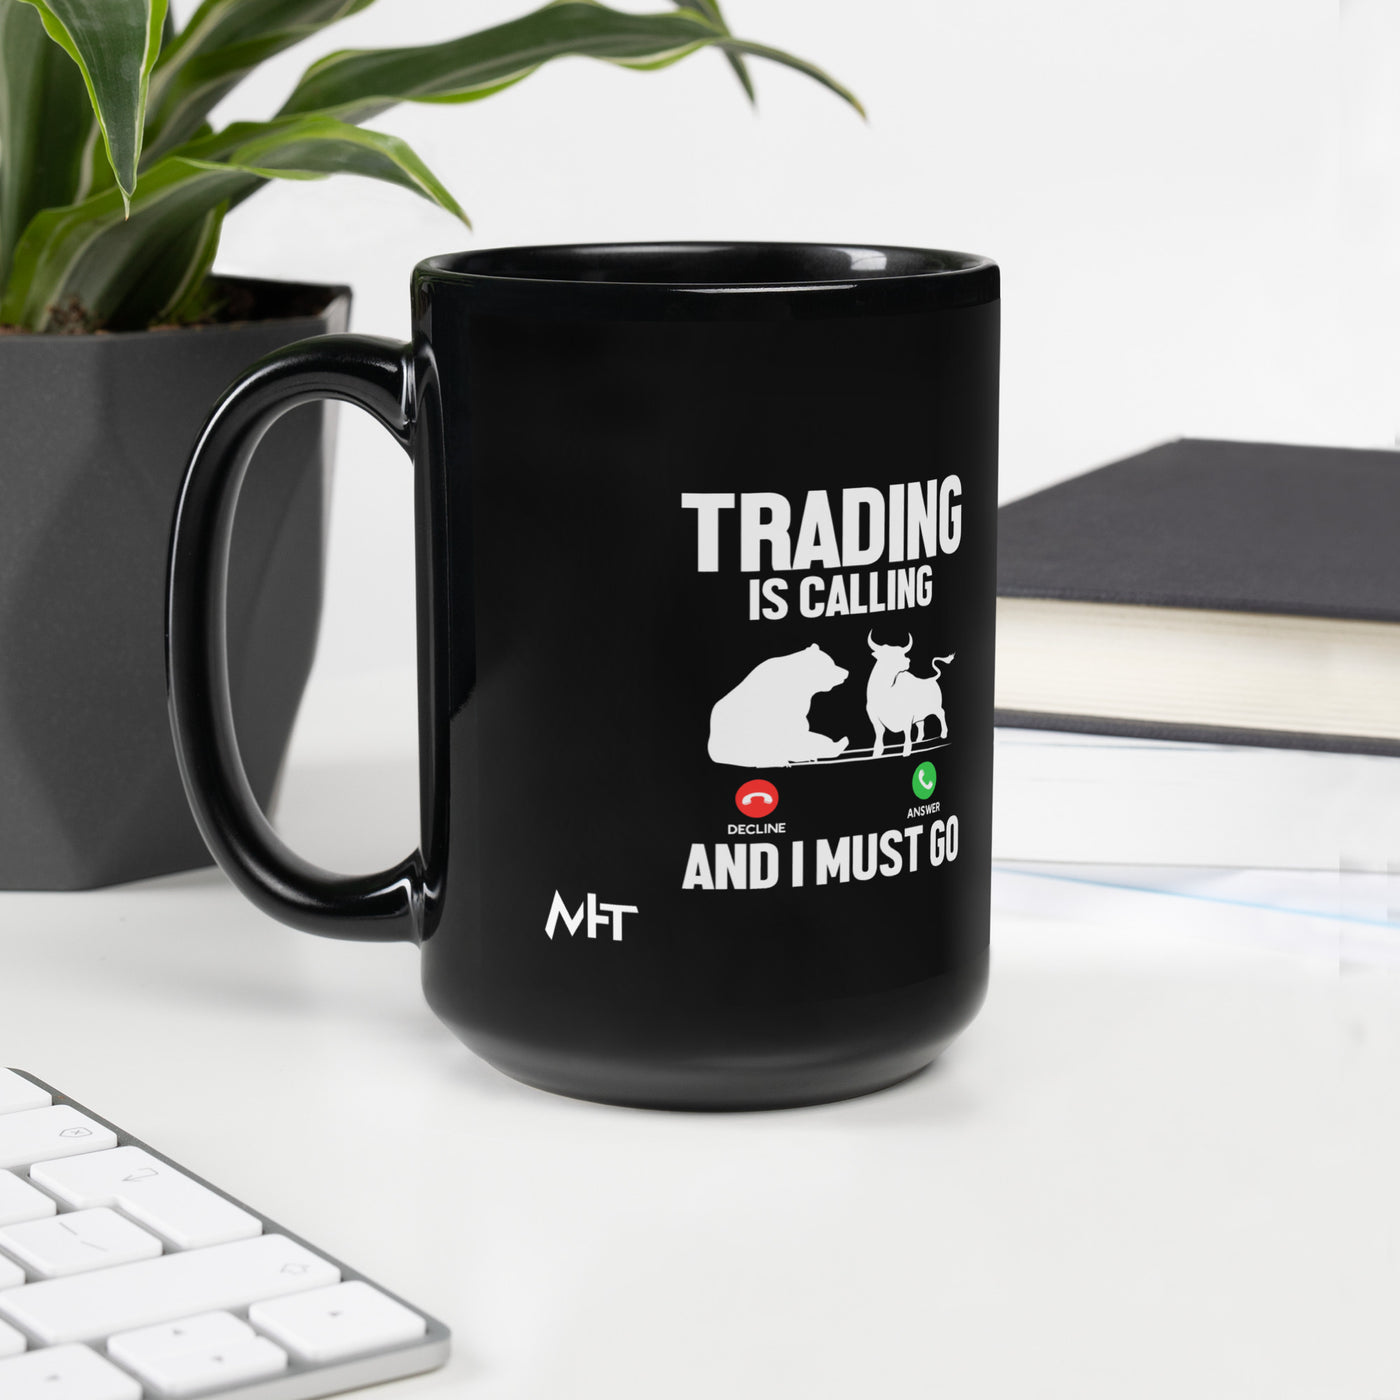 Trading is Calling Decline Answer and I Must go (DB) - Black Glossy Mug